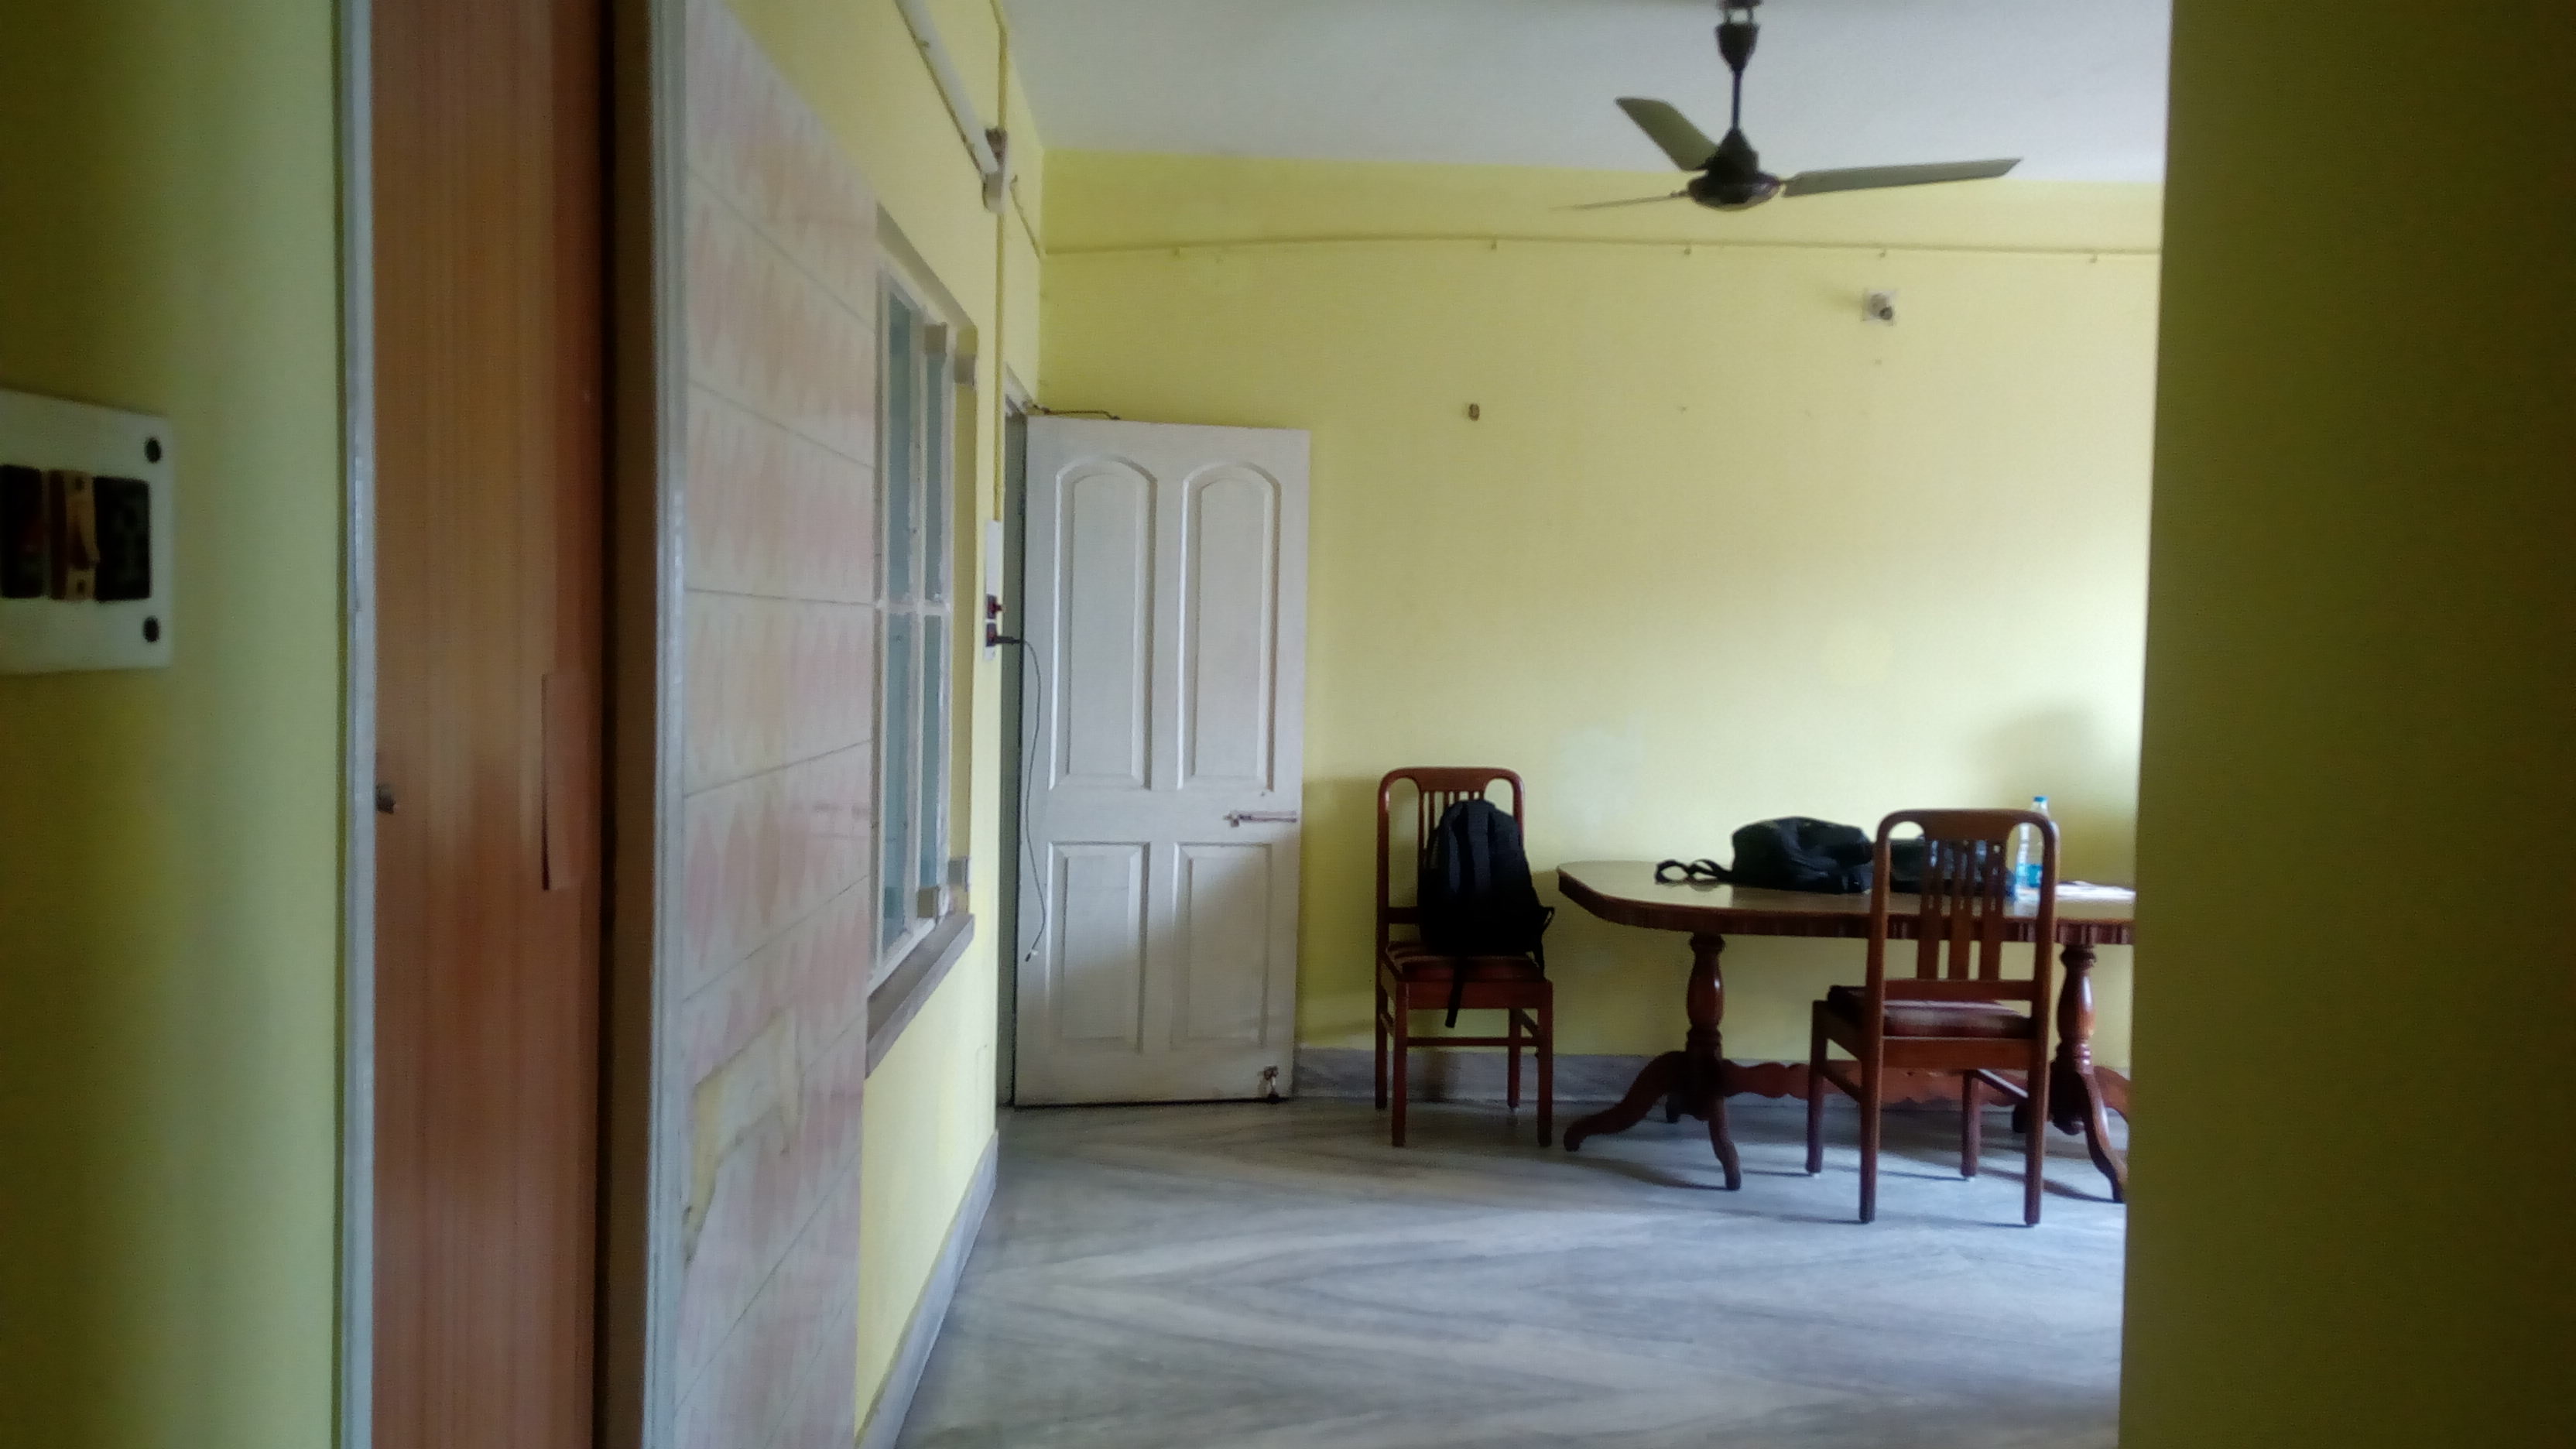 Office For Rent in Lake Town,Kolkata (Id:21428)